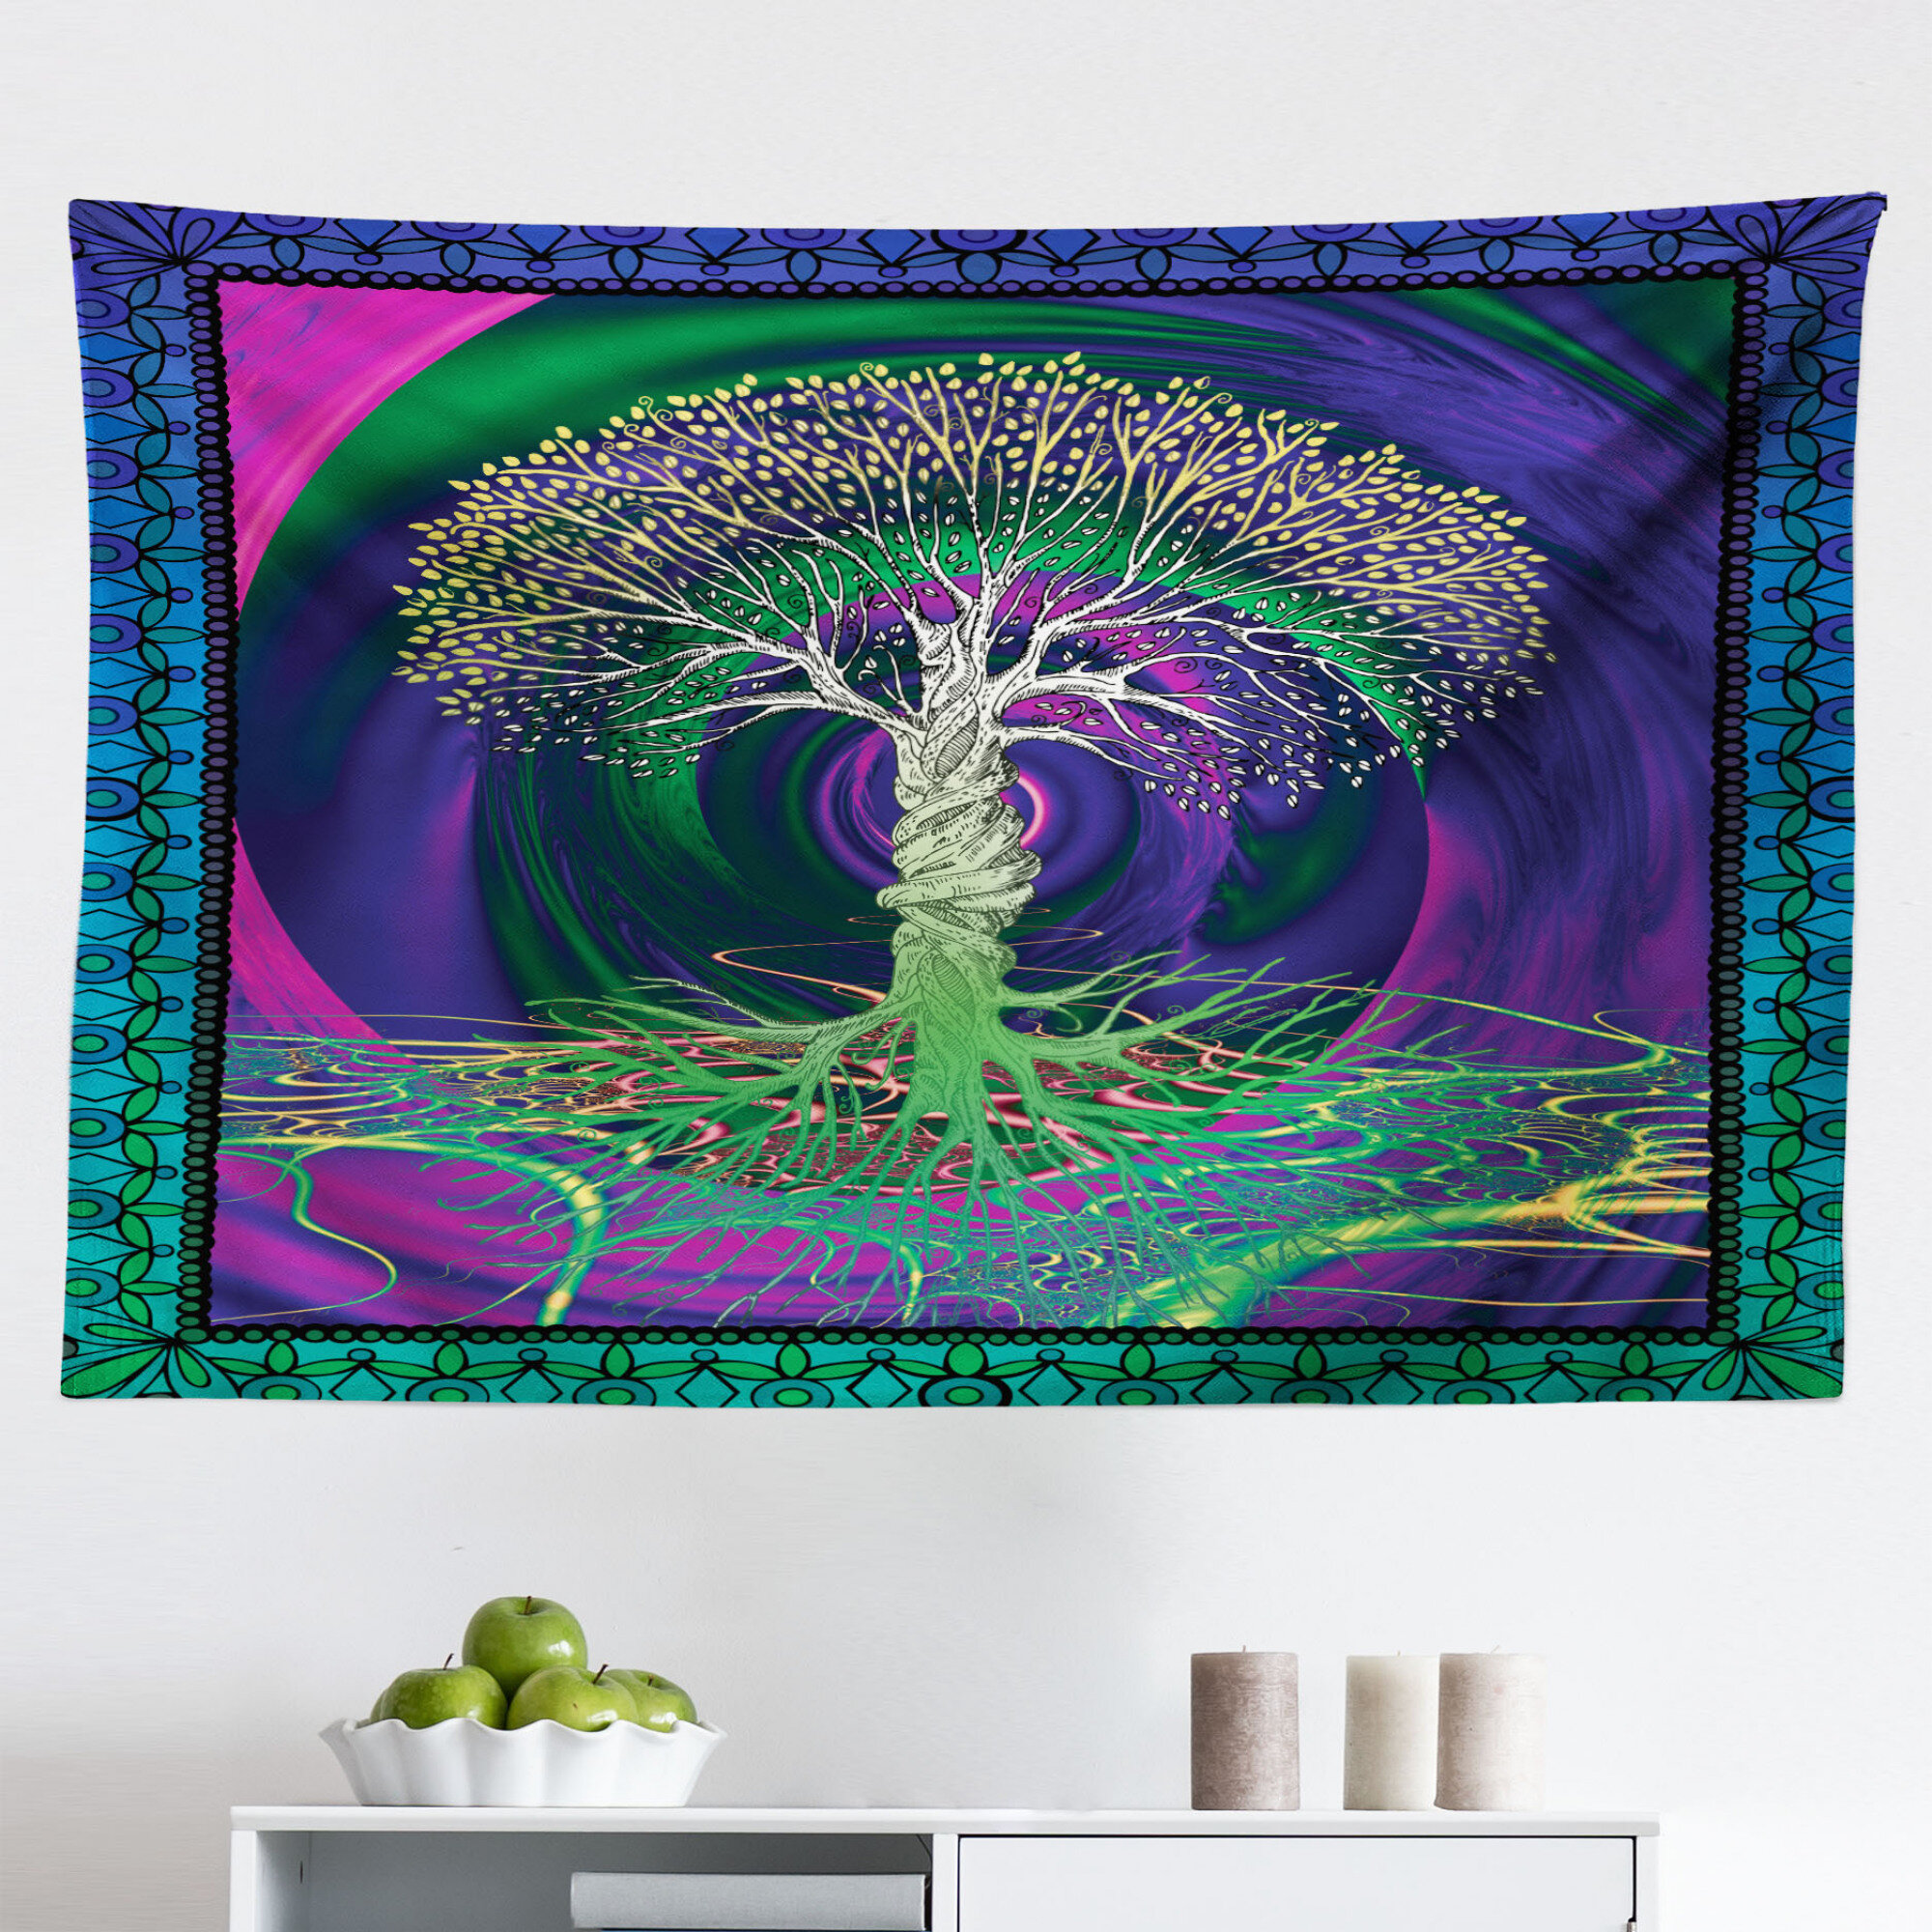 Green Tan Ambesonne Mythological Tapestry Wide Wall Hanging for Bedroom Living Room Dorm Woman with Snakes on Her Head Occult Style Meditation 80 X 60